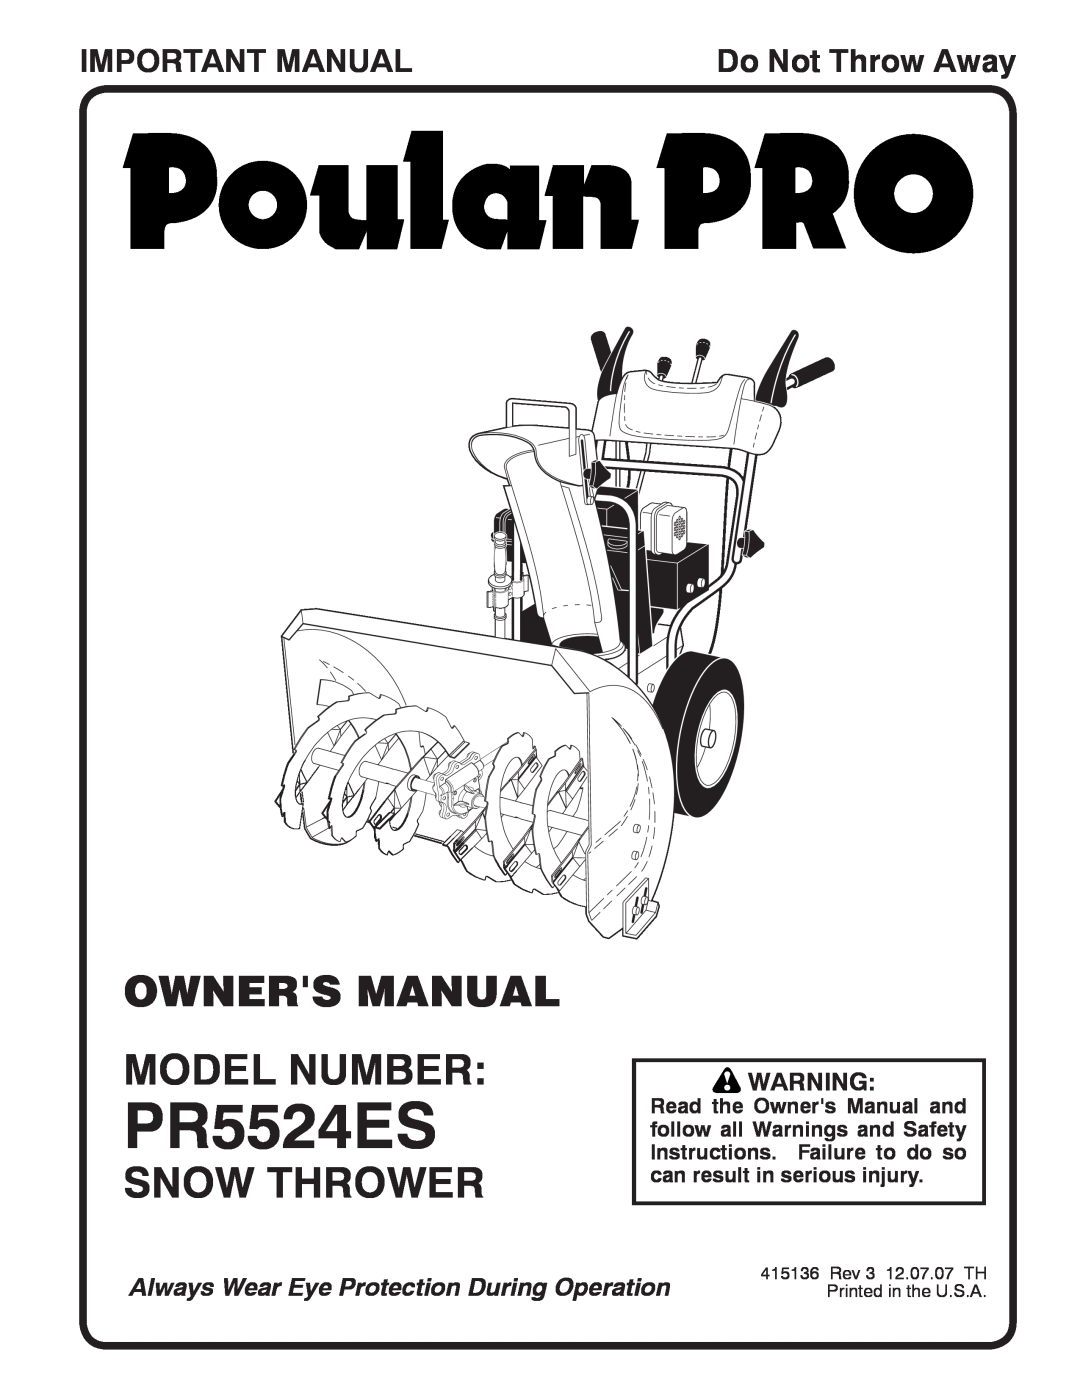 Poulan 415136 owner manual Owners Manual Model Number, Snow Thrower, Important Manual, PR5524ES, Do Not Throw Away 